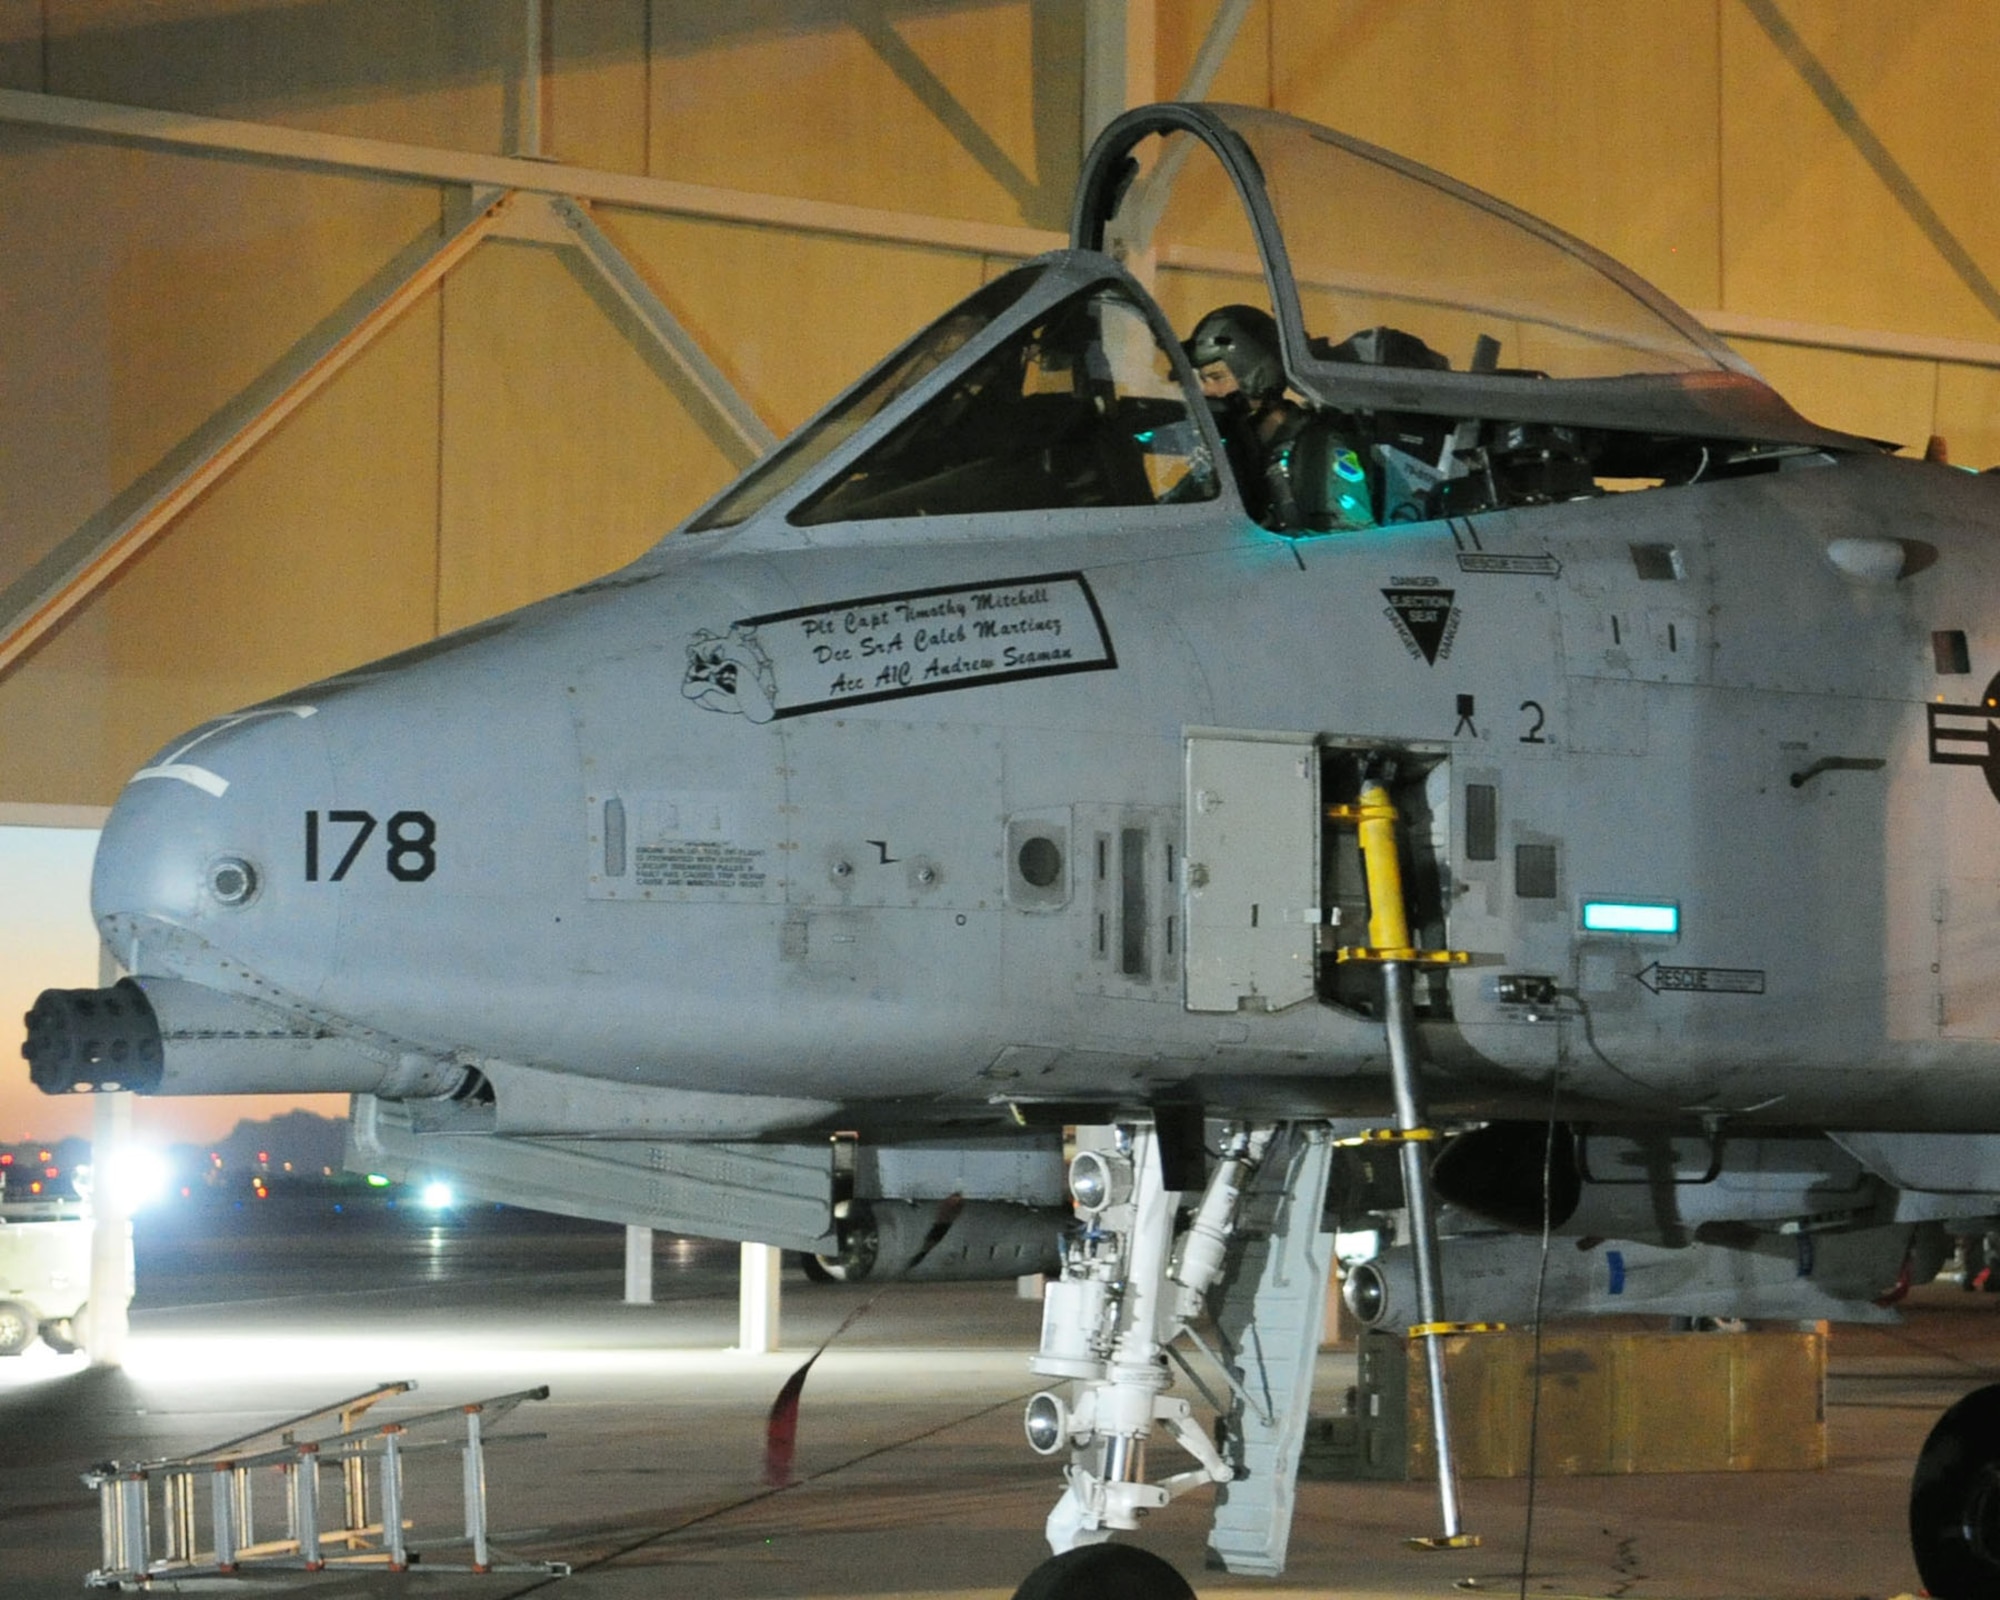 The canopy of his A-10C Thunderbolt II lowers as 1st Lt. Dan Griffin, a pilot from the 358th Fighter Squadron at Davis-Monthan Air Force Base, Ariz., prepares to taxi out for his second of eight night flying missions June 23, 2010. Lieutenant Griffin is a student in the A-10C Pilot Initial Qualification course and as part of his training requirements he must learn to execute night flying missions using night vision goggles. He will accomplish this training through six hours of academic classes, five hours in the A-10 flight simulator and training flights. (U.S. Air Force photo/Airman 1st Class Jerilyn Quintanilla)